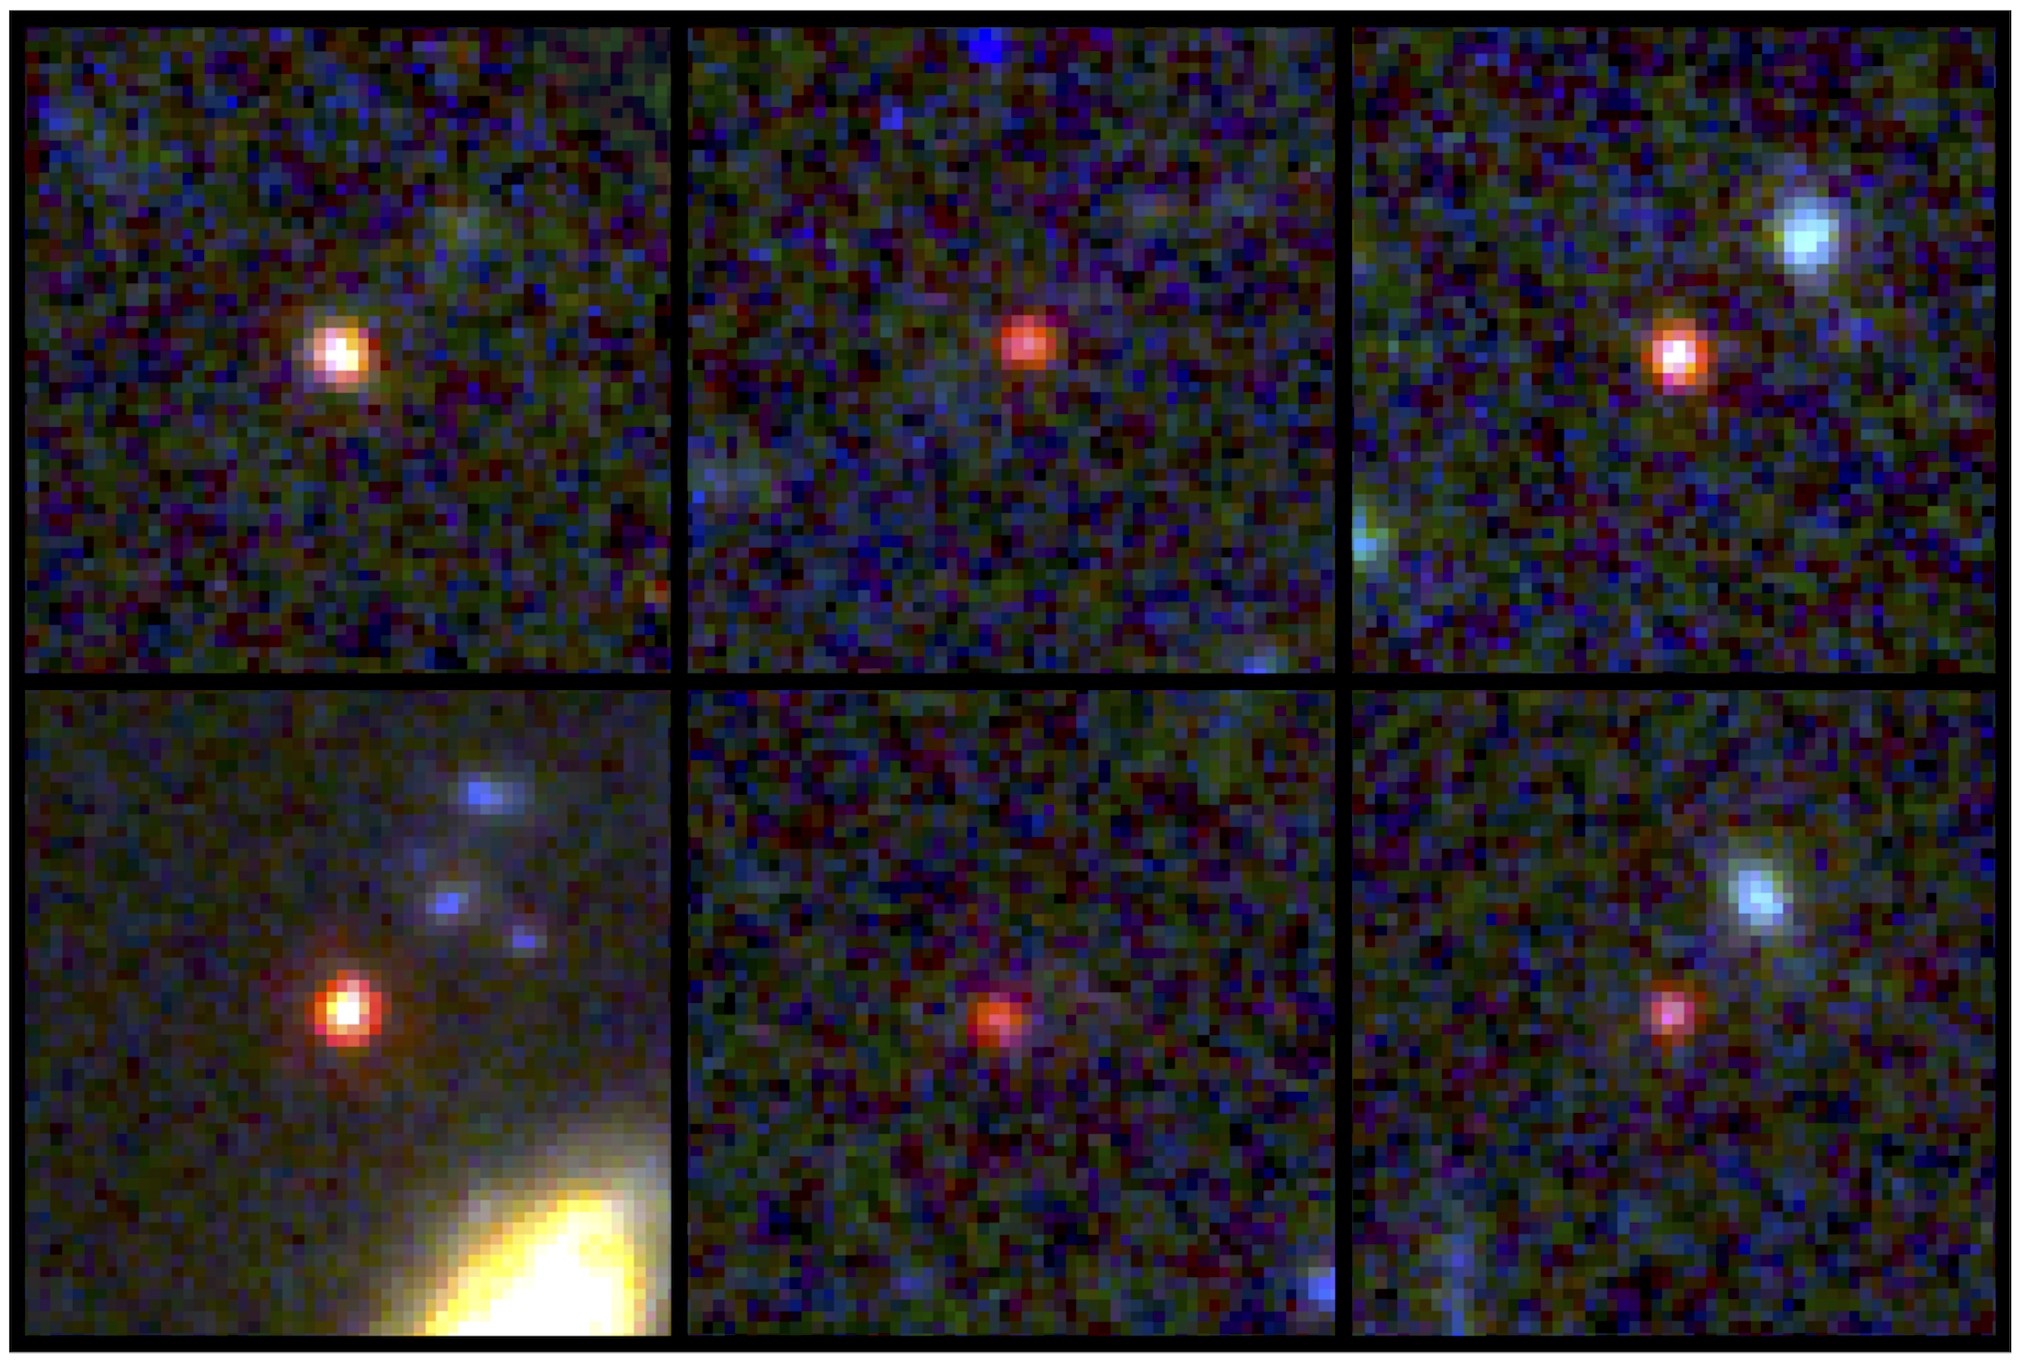 Images of six candidate massive galaxies, seen 500-800 million years after the Big Bang. One of the sources (bottom left) could contain as many stars as our present-day Milky Way, but is 30 times more compact.   These images are a composite of separate exposures taken by the James Webb Space Telescope using the NIRCam instrument.  NASA, ESA, CSA, I. Labbe (Swinburne University of Technology). Image processing: G Brammer (Niels Bohr Institute’s Cosmic Dawn Center at the University of Copenhagen).